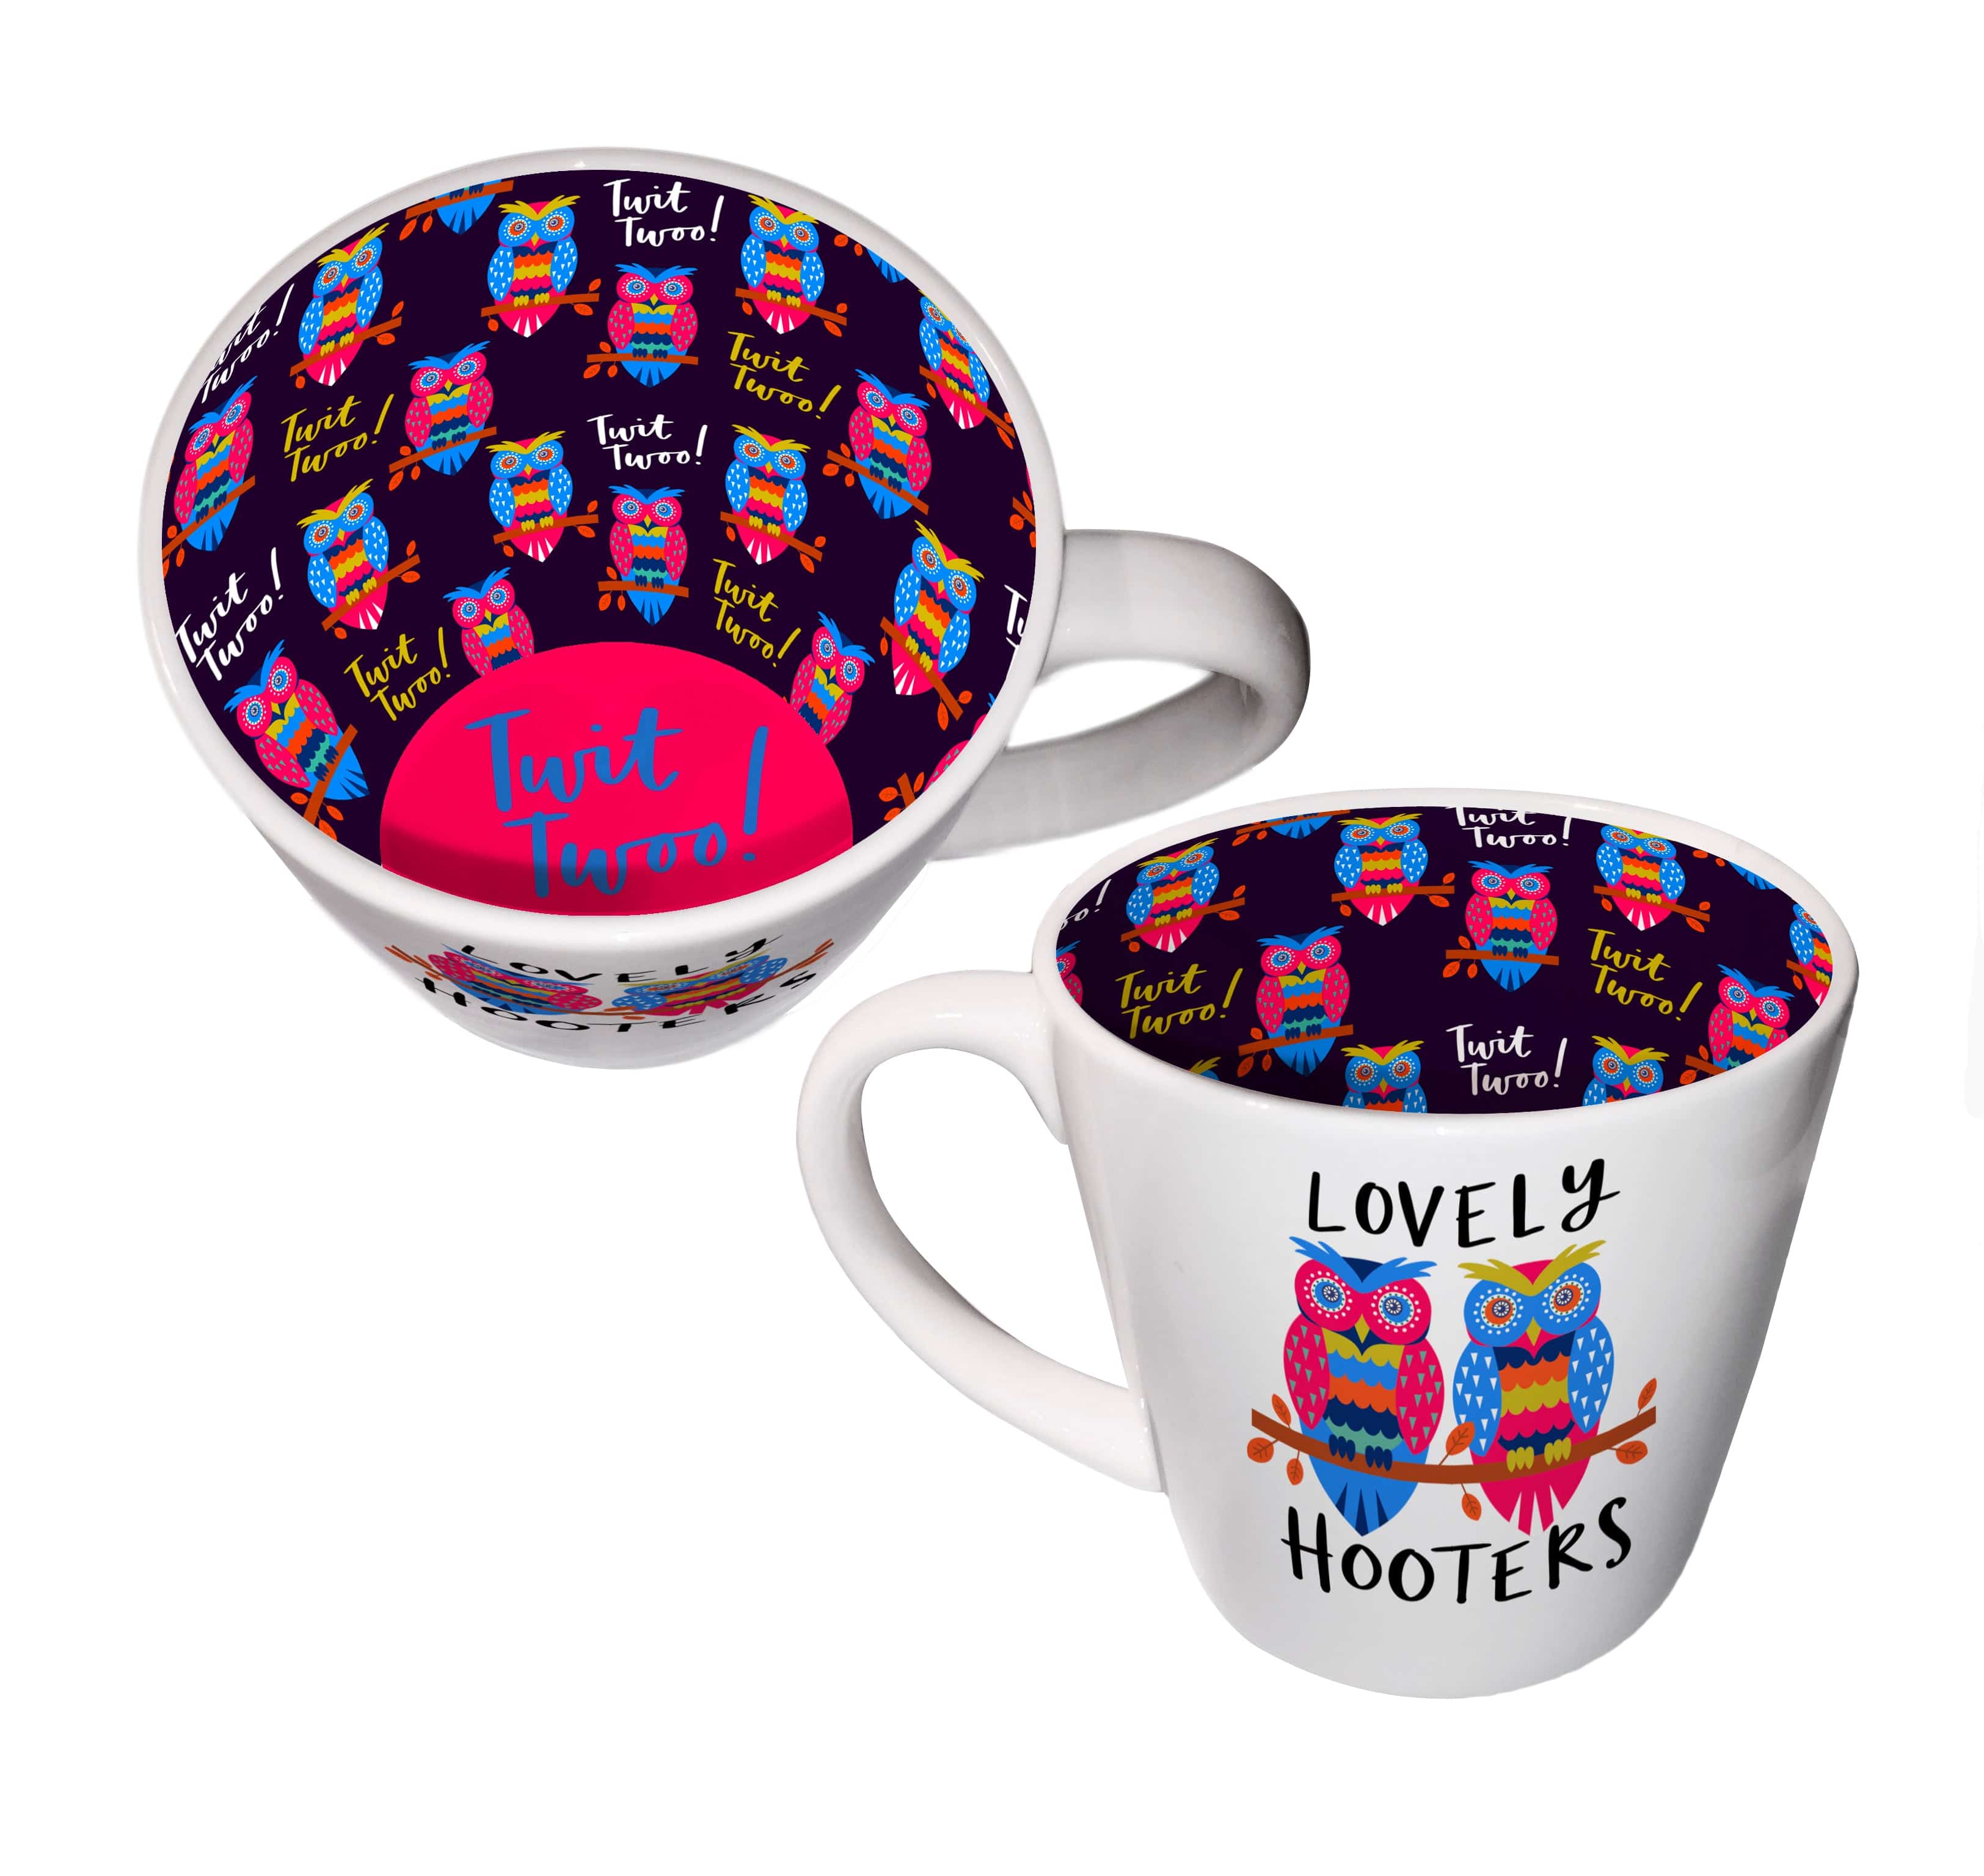 WPL Gifts Mug Inside Out Mug With Gift Box - Lovely Hooters